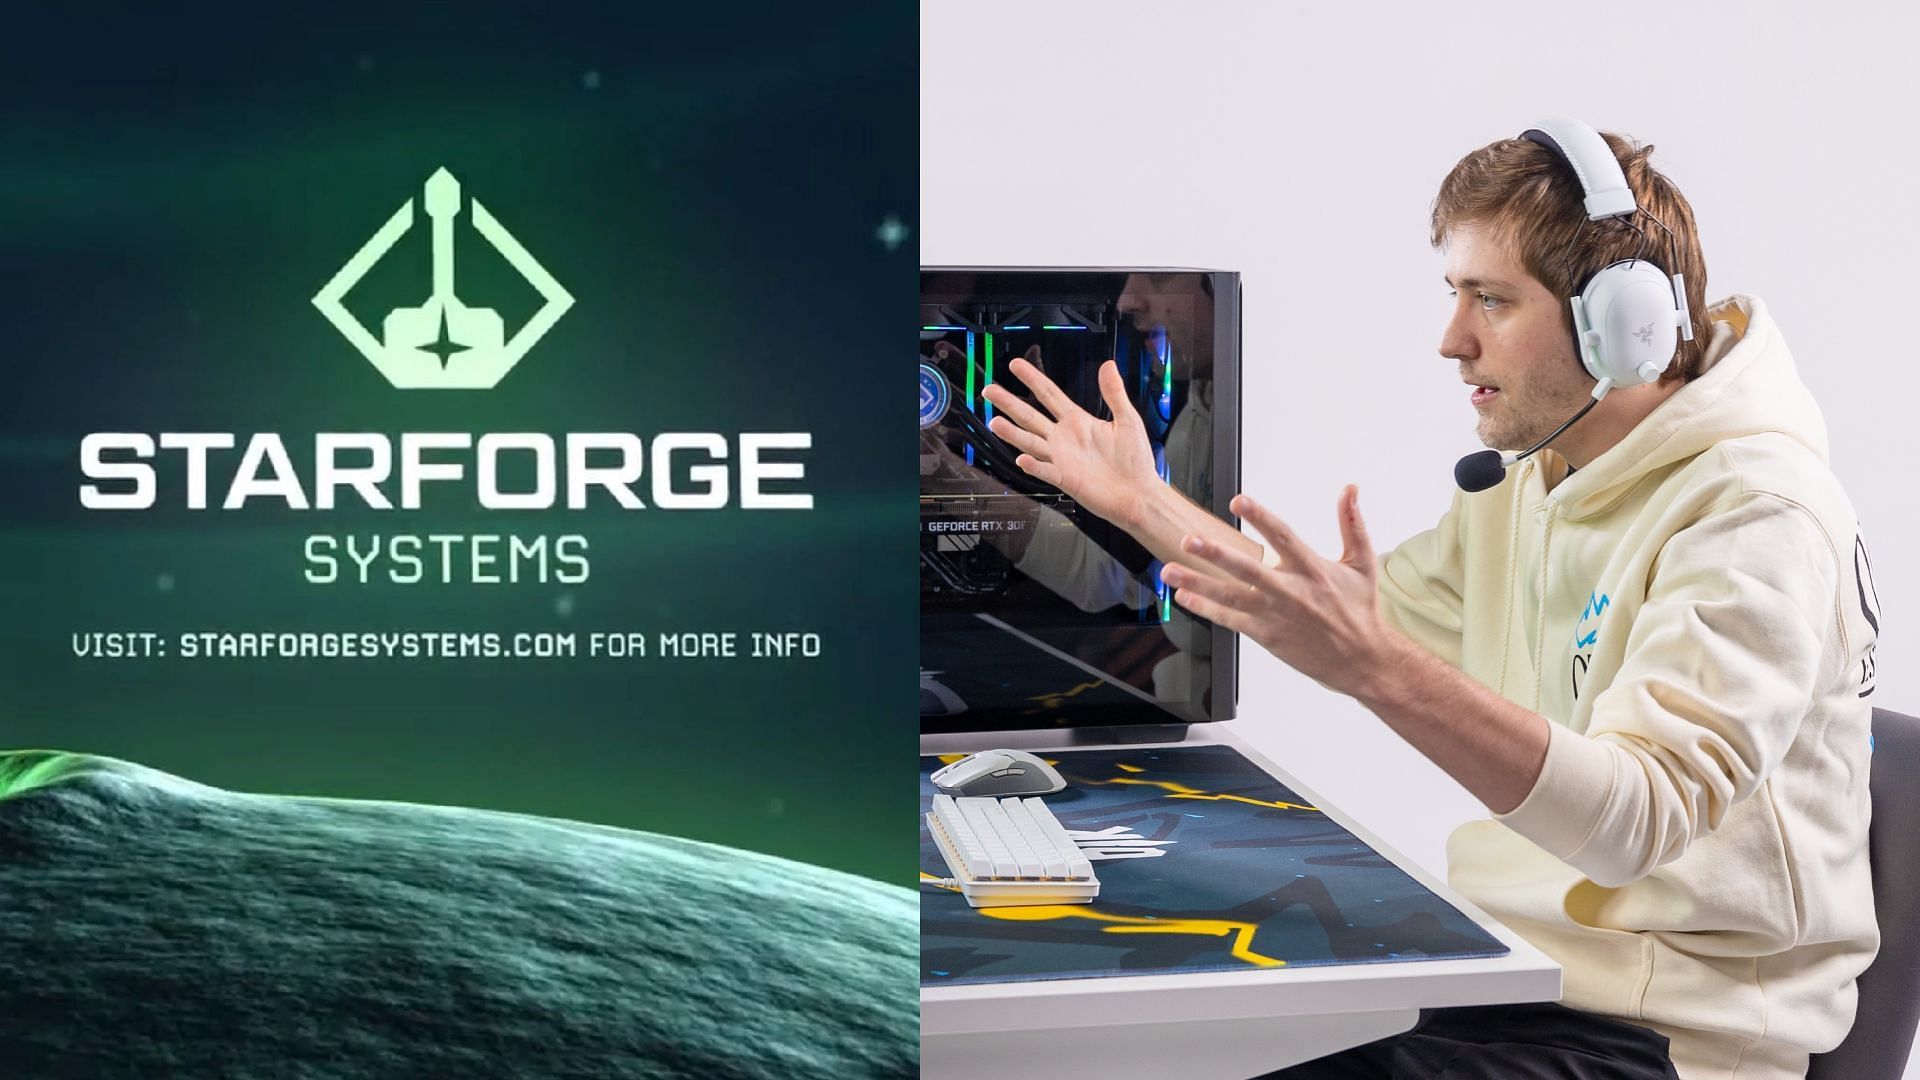 Starforge Systems face backlash even after slashing prices by $100 (Image via Starforge Systems/ Twitter)